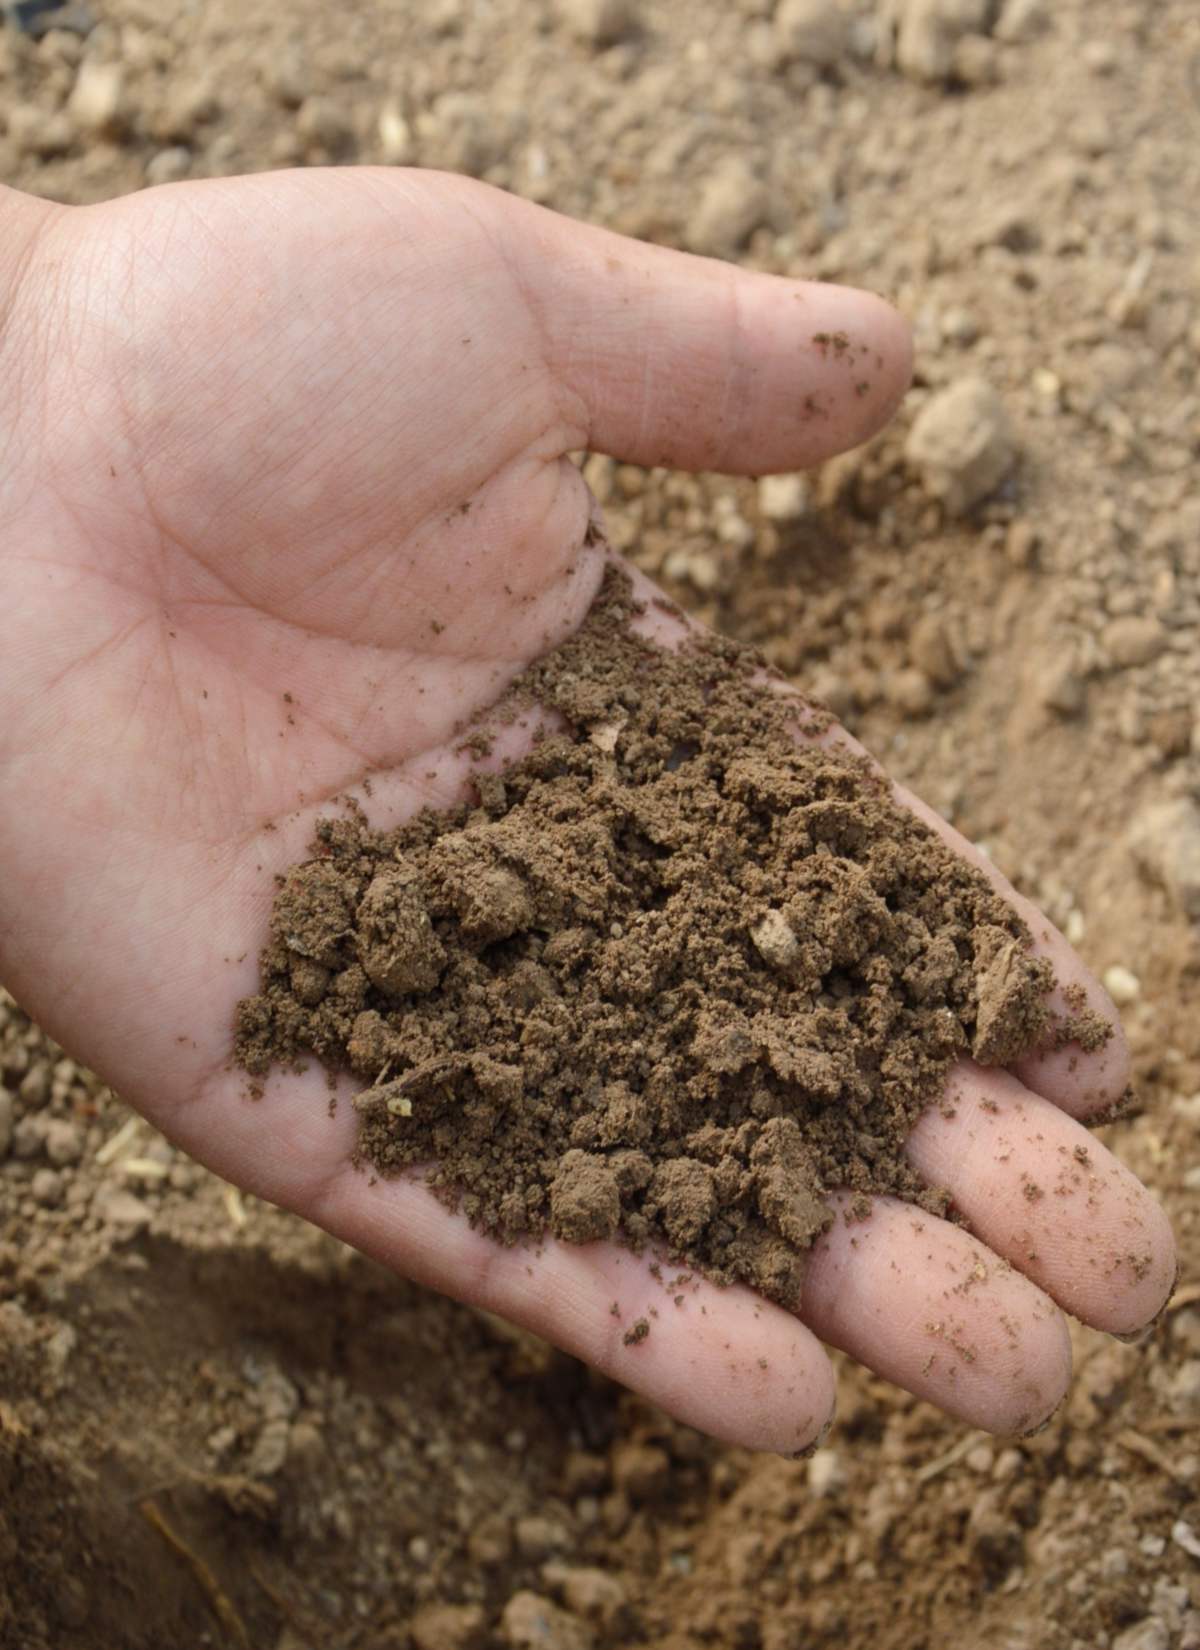 Sandy soil in a hand, the best way to identify the type of soil.